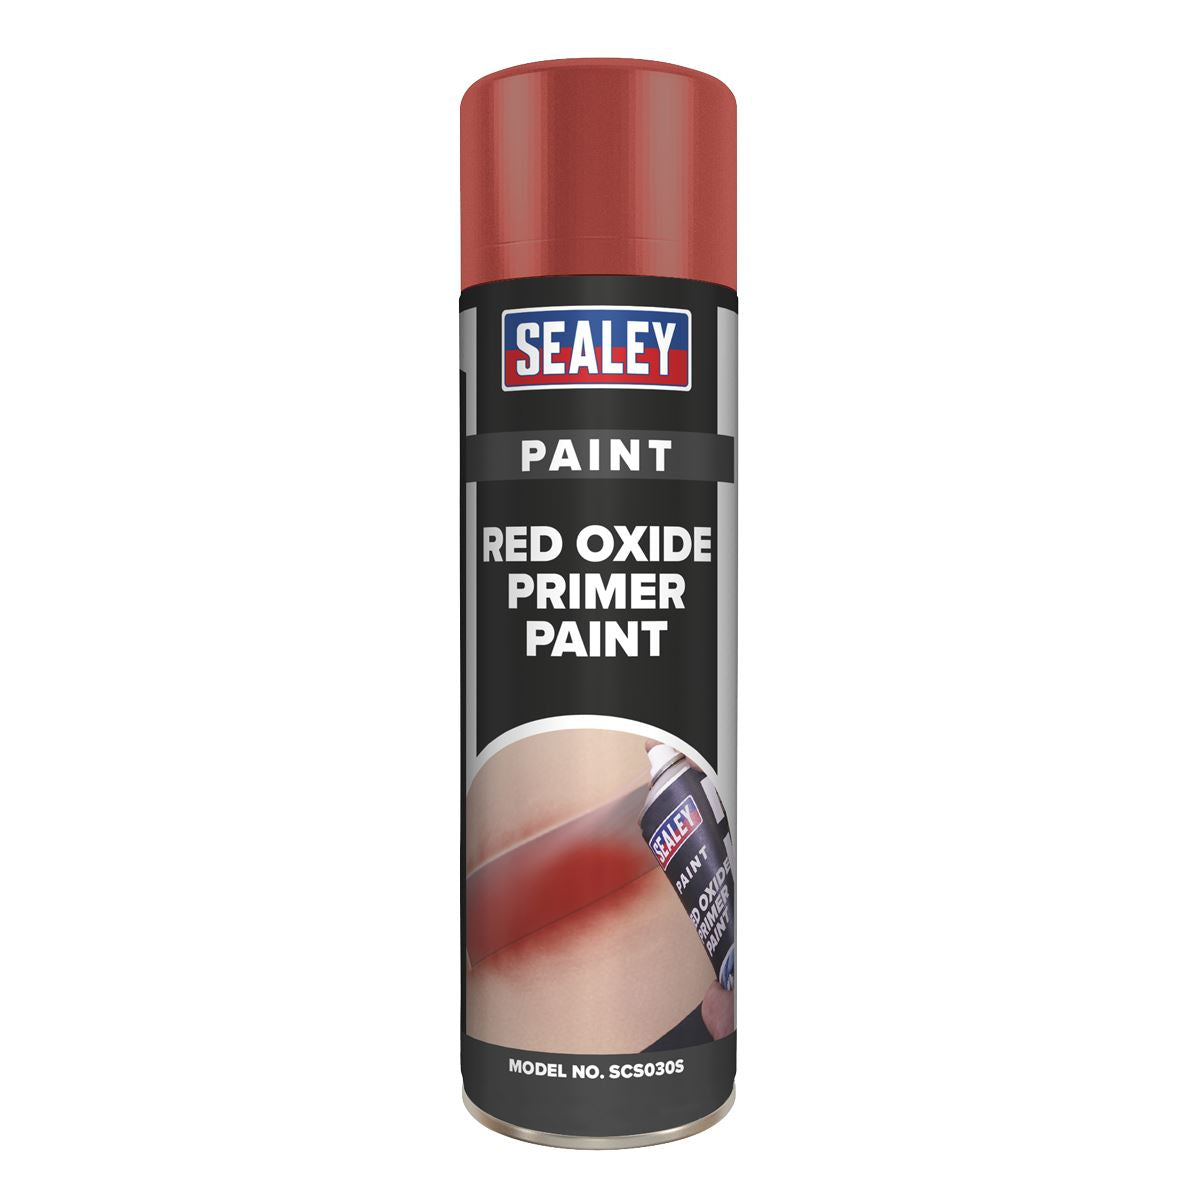 Sealey Red Oxide Primer Paint 500ml